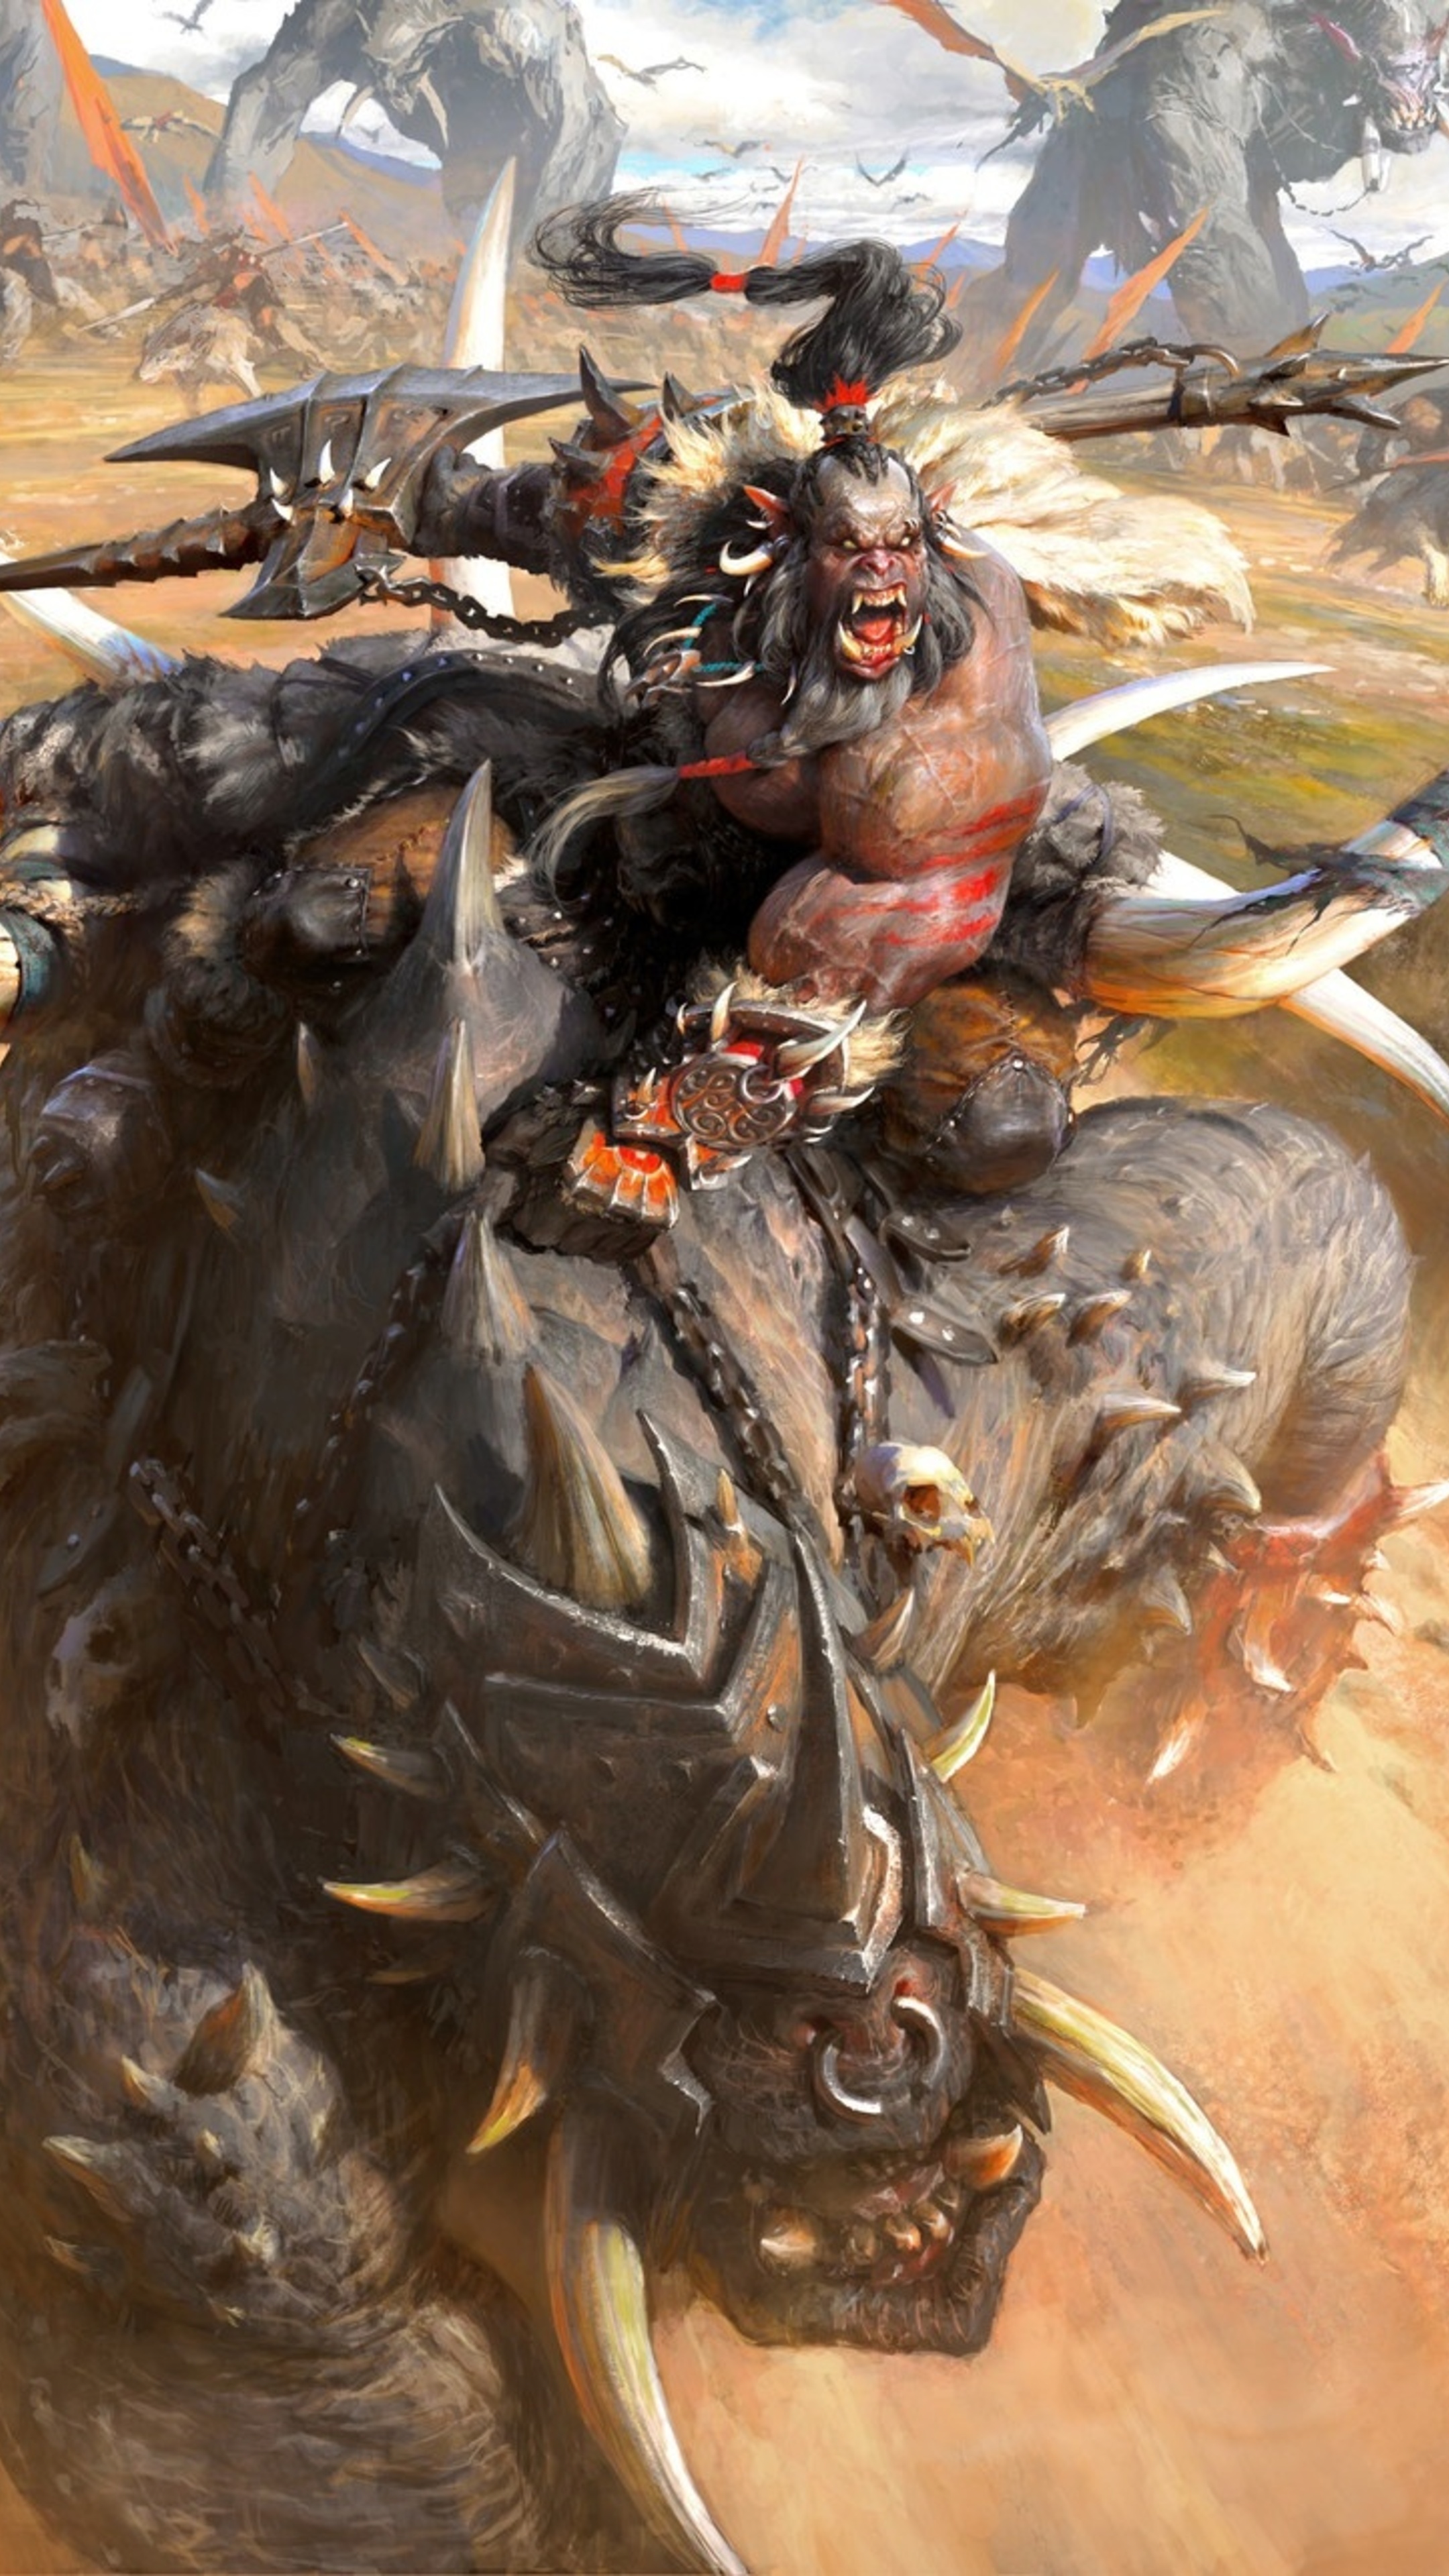 Orc in war, Sony Xperia wallpapers, Art and images, Premium HD quality, 2160x3840 4K Handy